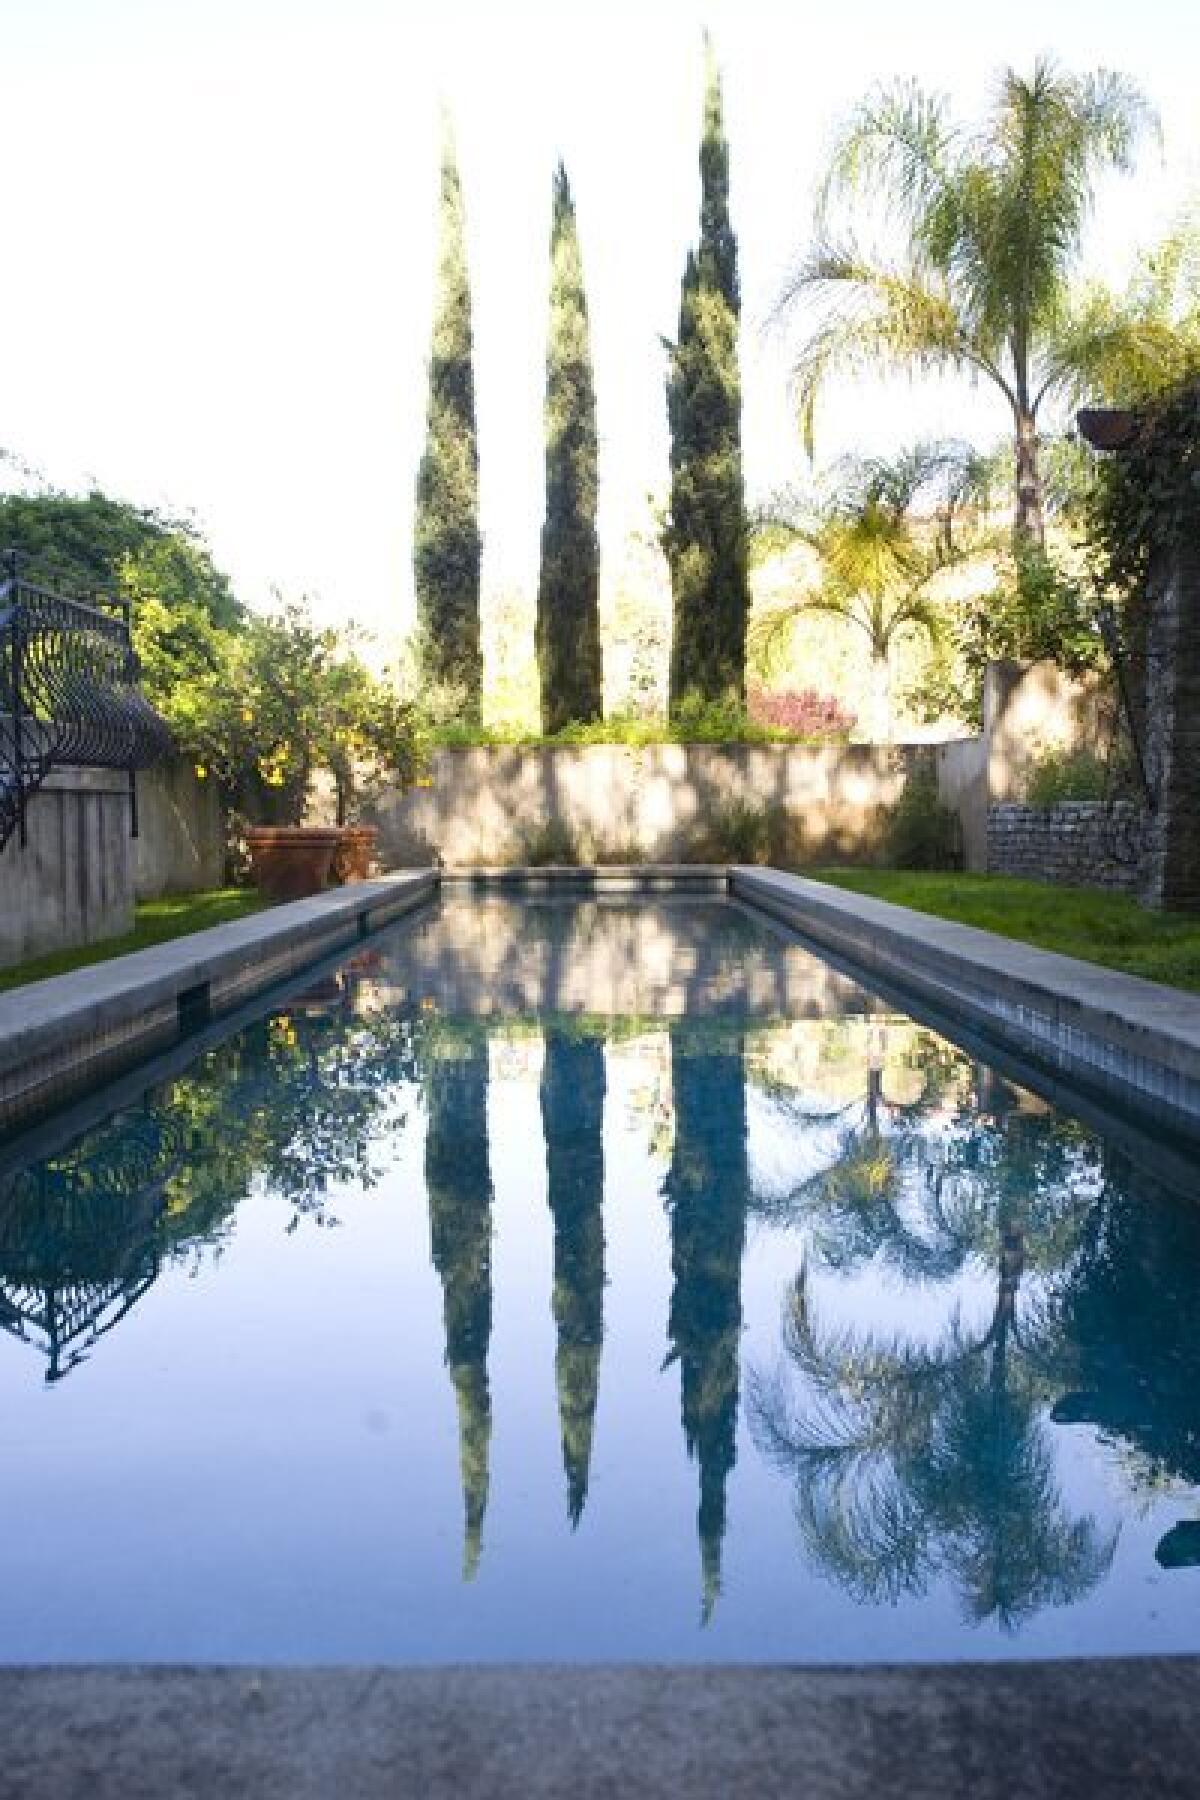 Italian cypress trees are often used as screens between properties; the ones pictured here in a Pasadena garden also provide a nice reflection in the pool. For a reader in the Antelope Valley, the hurdle to healthy trees might be in the soil.